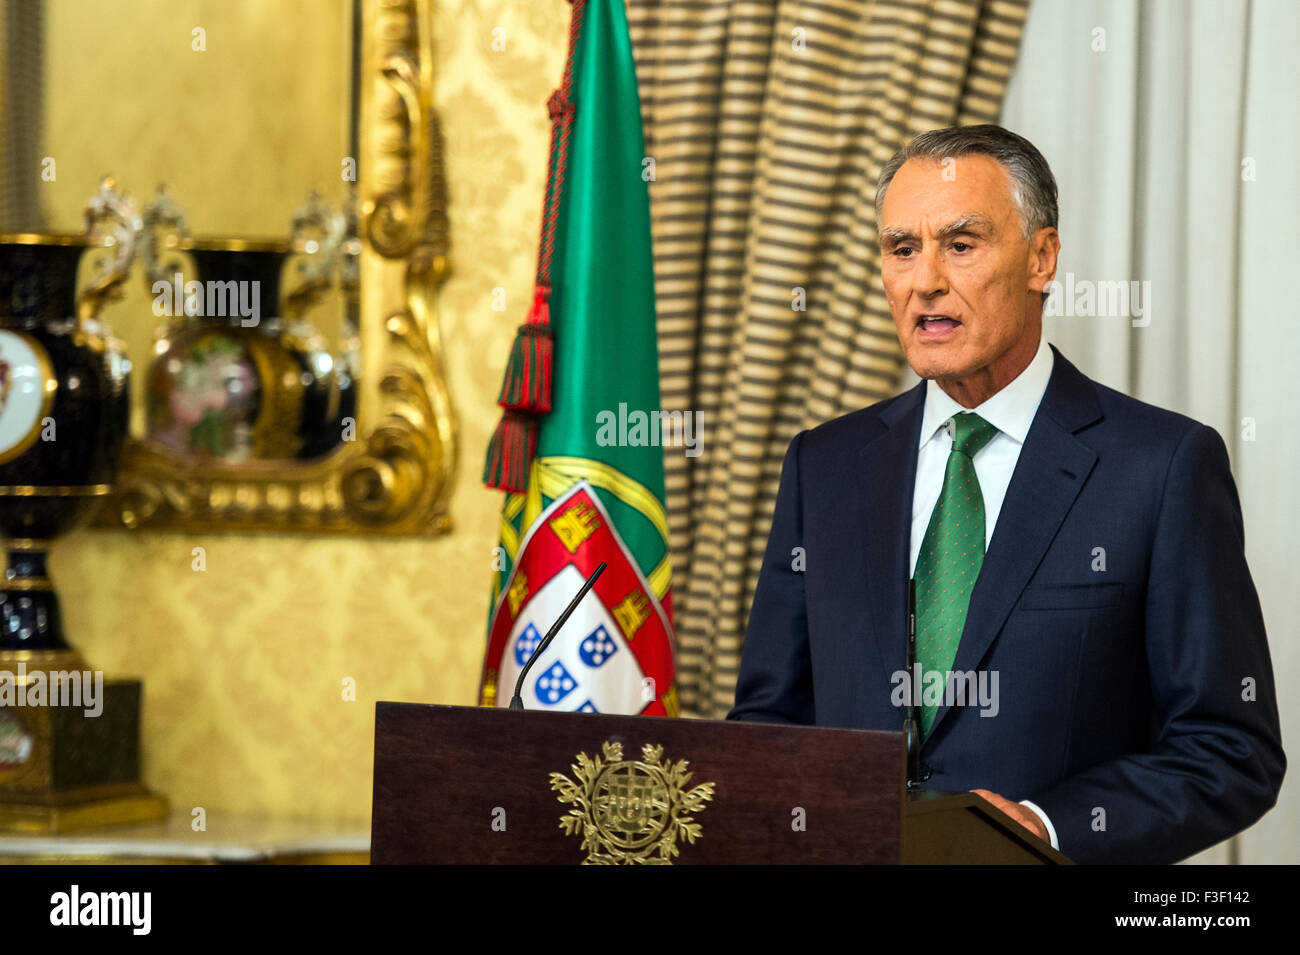 Lisbon, Portugal. 6th October, 2015. Portuguese President Cavaco Silva speaks to the Portuguese people about the new Government. Lisbon, PT, on Out 6, 2015. (Photo by Gonçalo Silva/Alamy Live News) Stock Photo